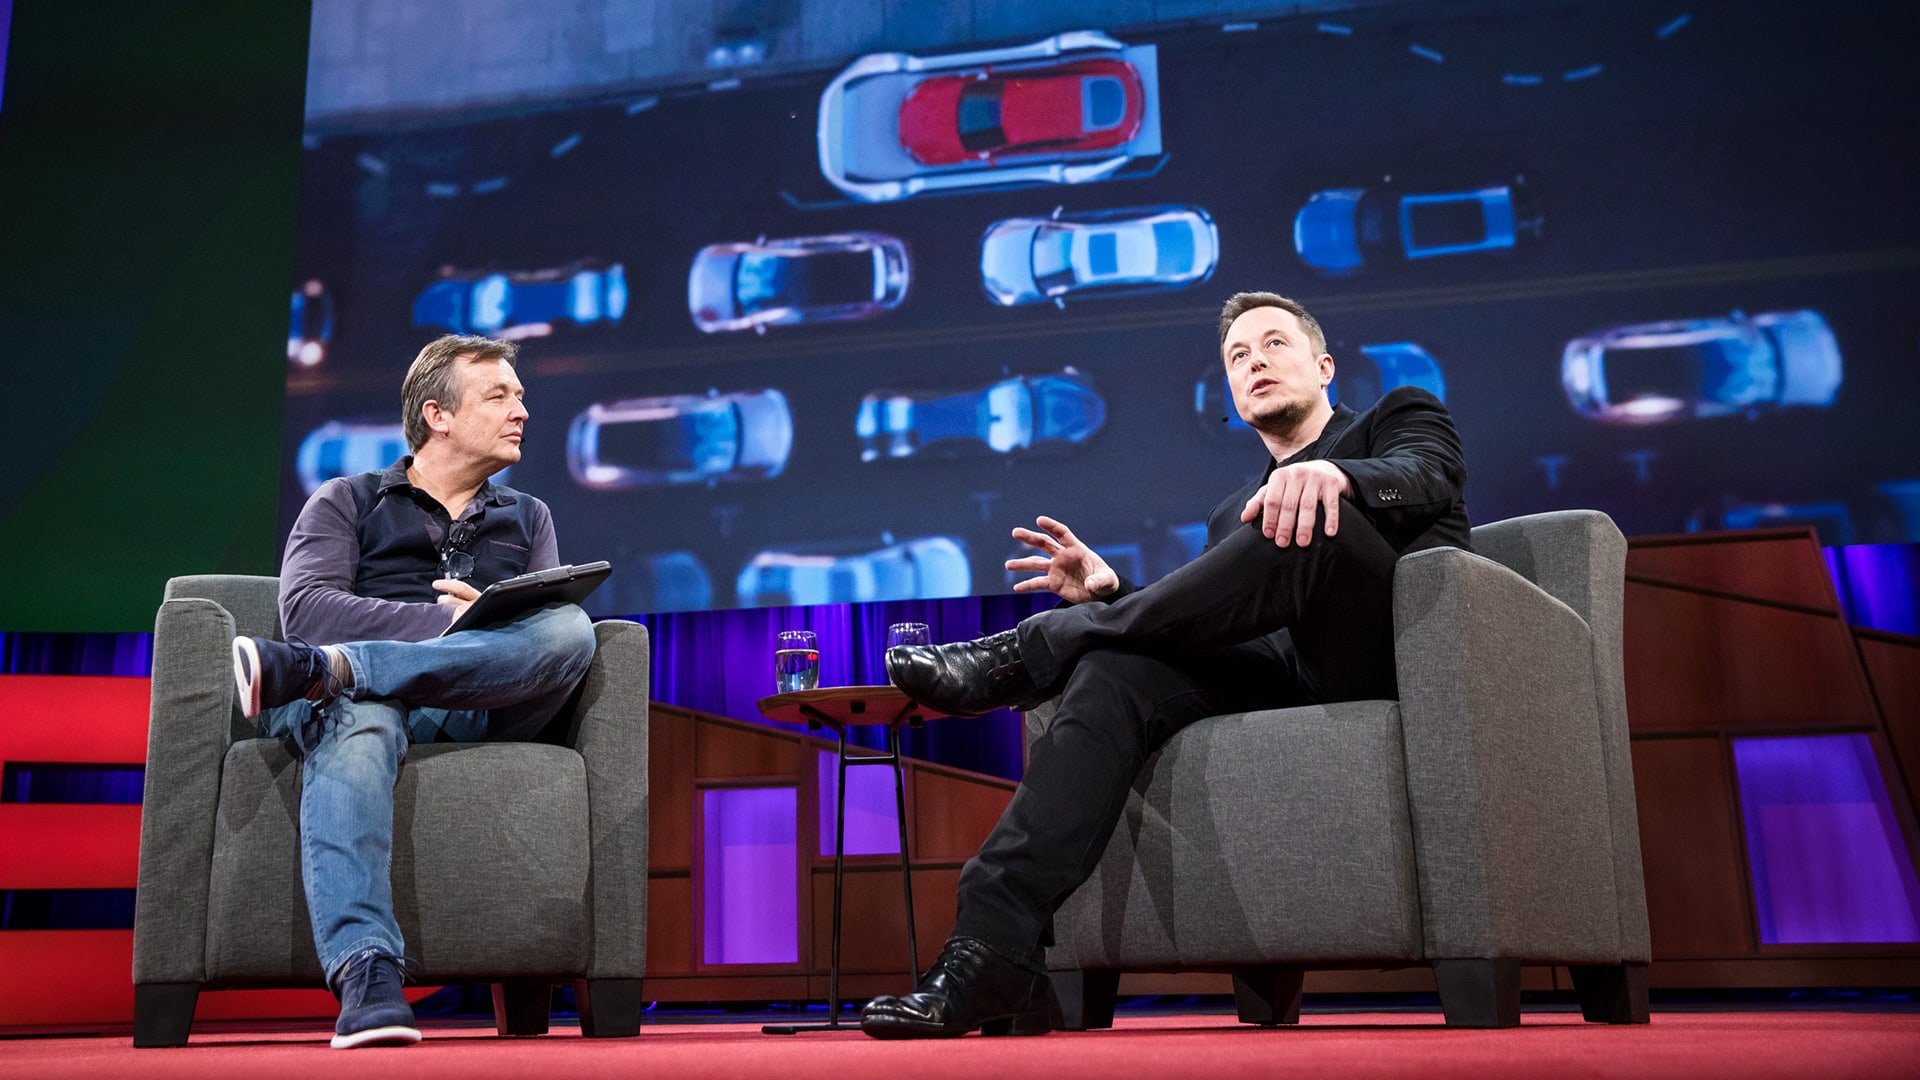 Elon Musk Shows Off A “Boring” Tunnel Network To End L.A.’s Traffic Jams